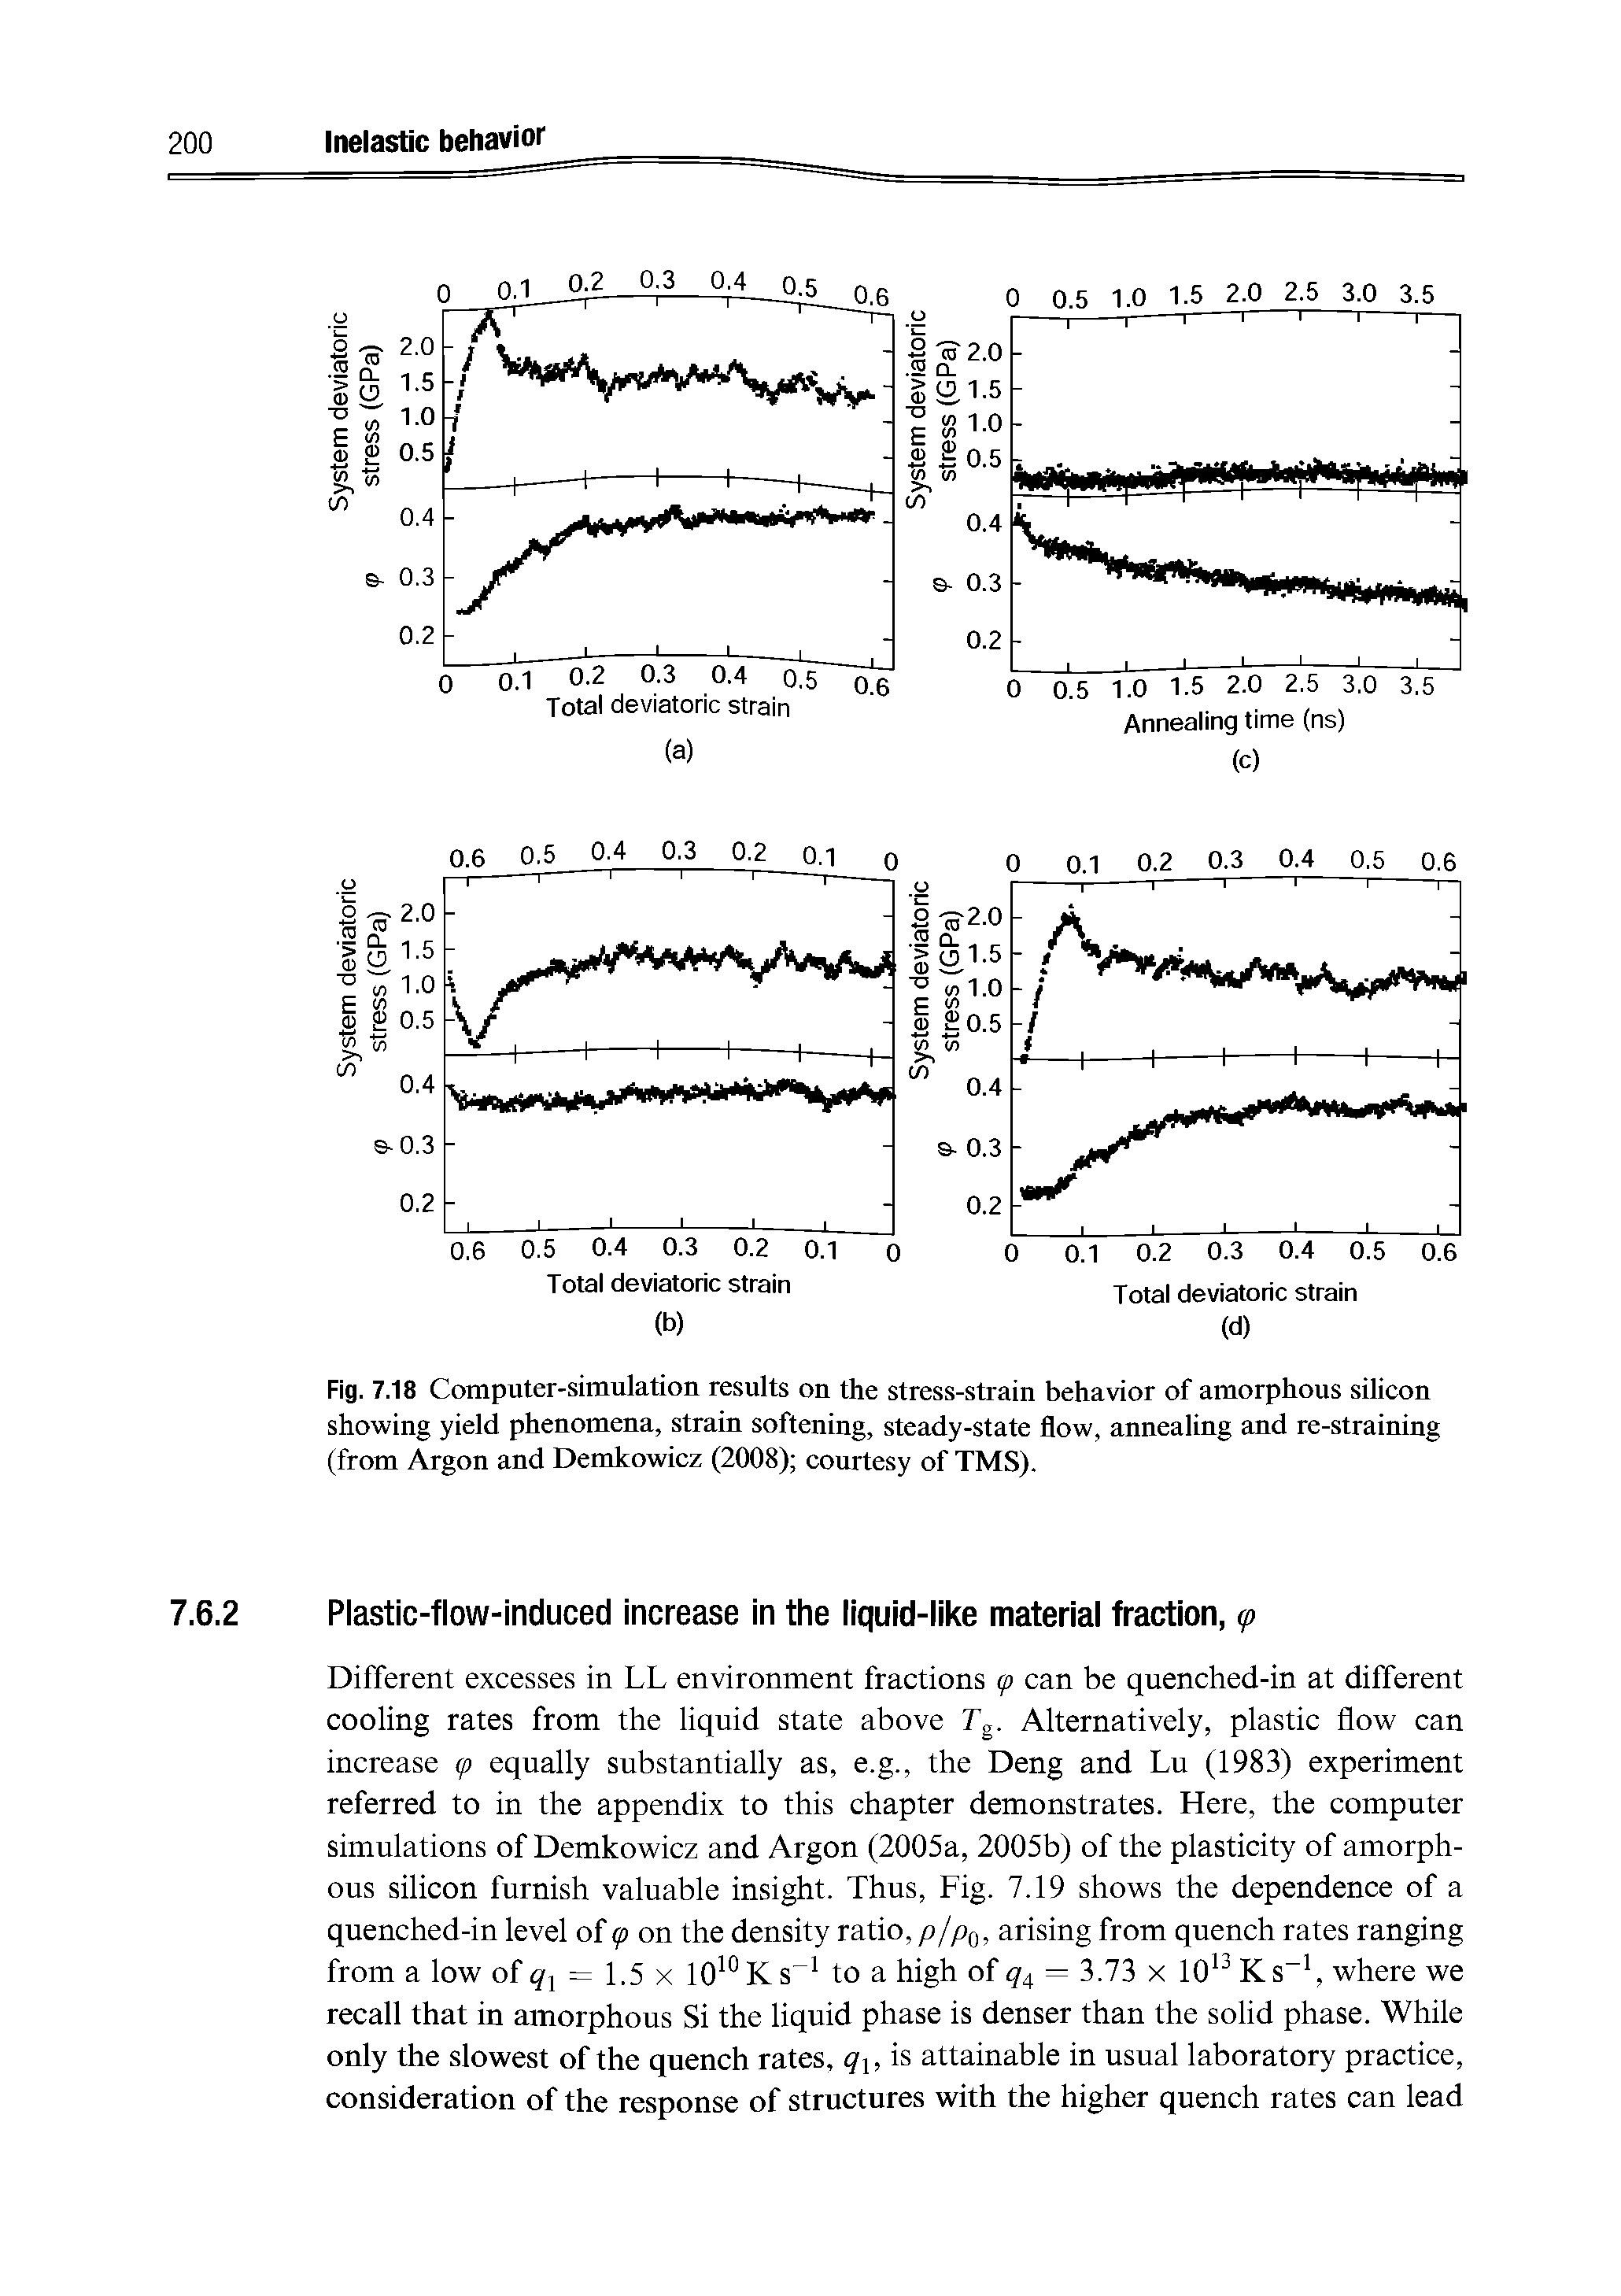 Fig. 7.18 Computer-simulation results on the stress-strain behavior of amorphous silicon showing yield phenomena, strain softening, steady-state flow, annealing and re-straining (from Argon and Demkowicz (2008) courtesy of TMS).